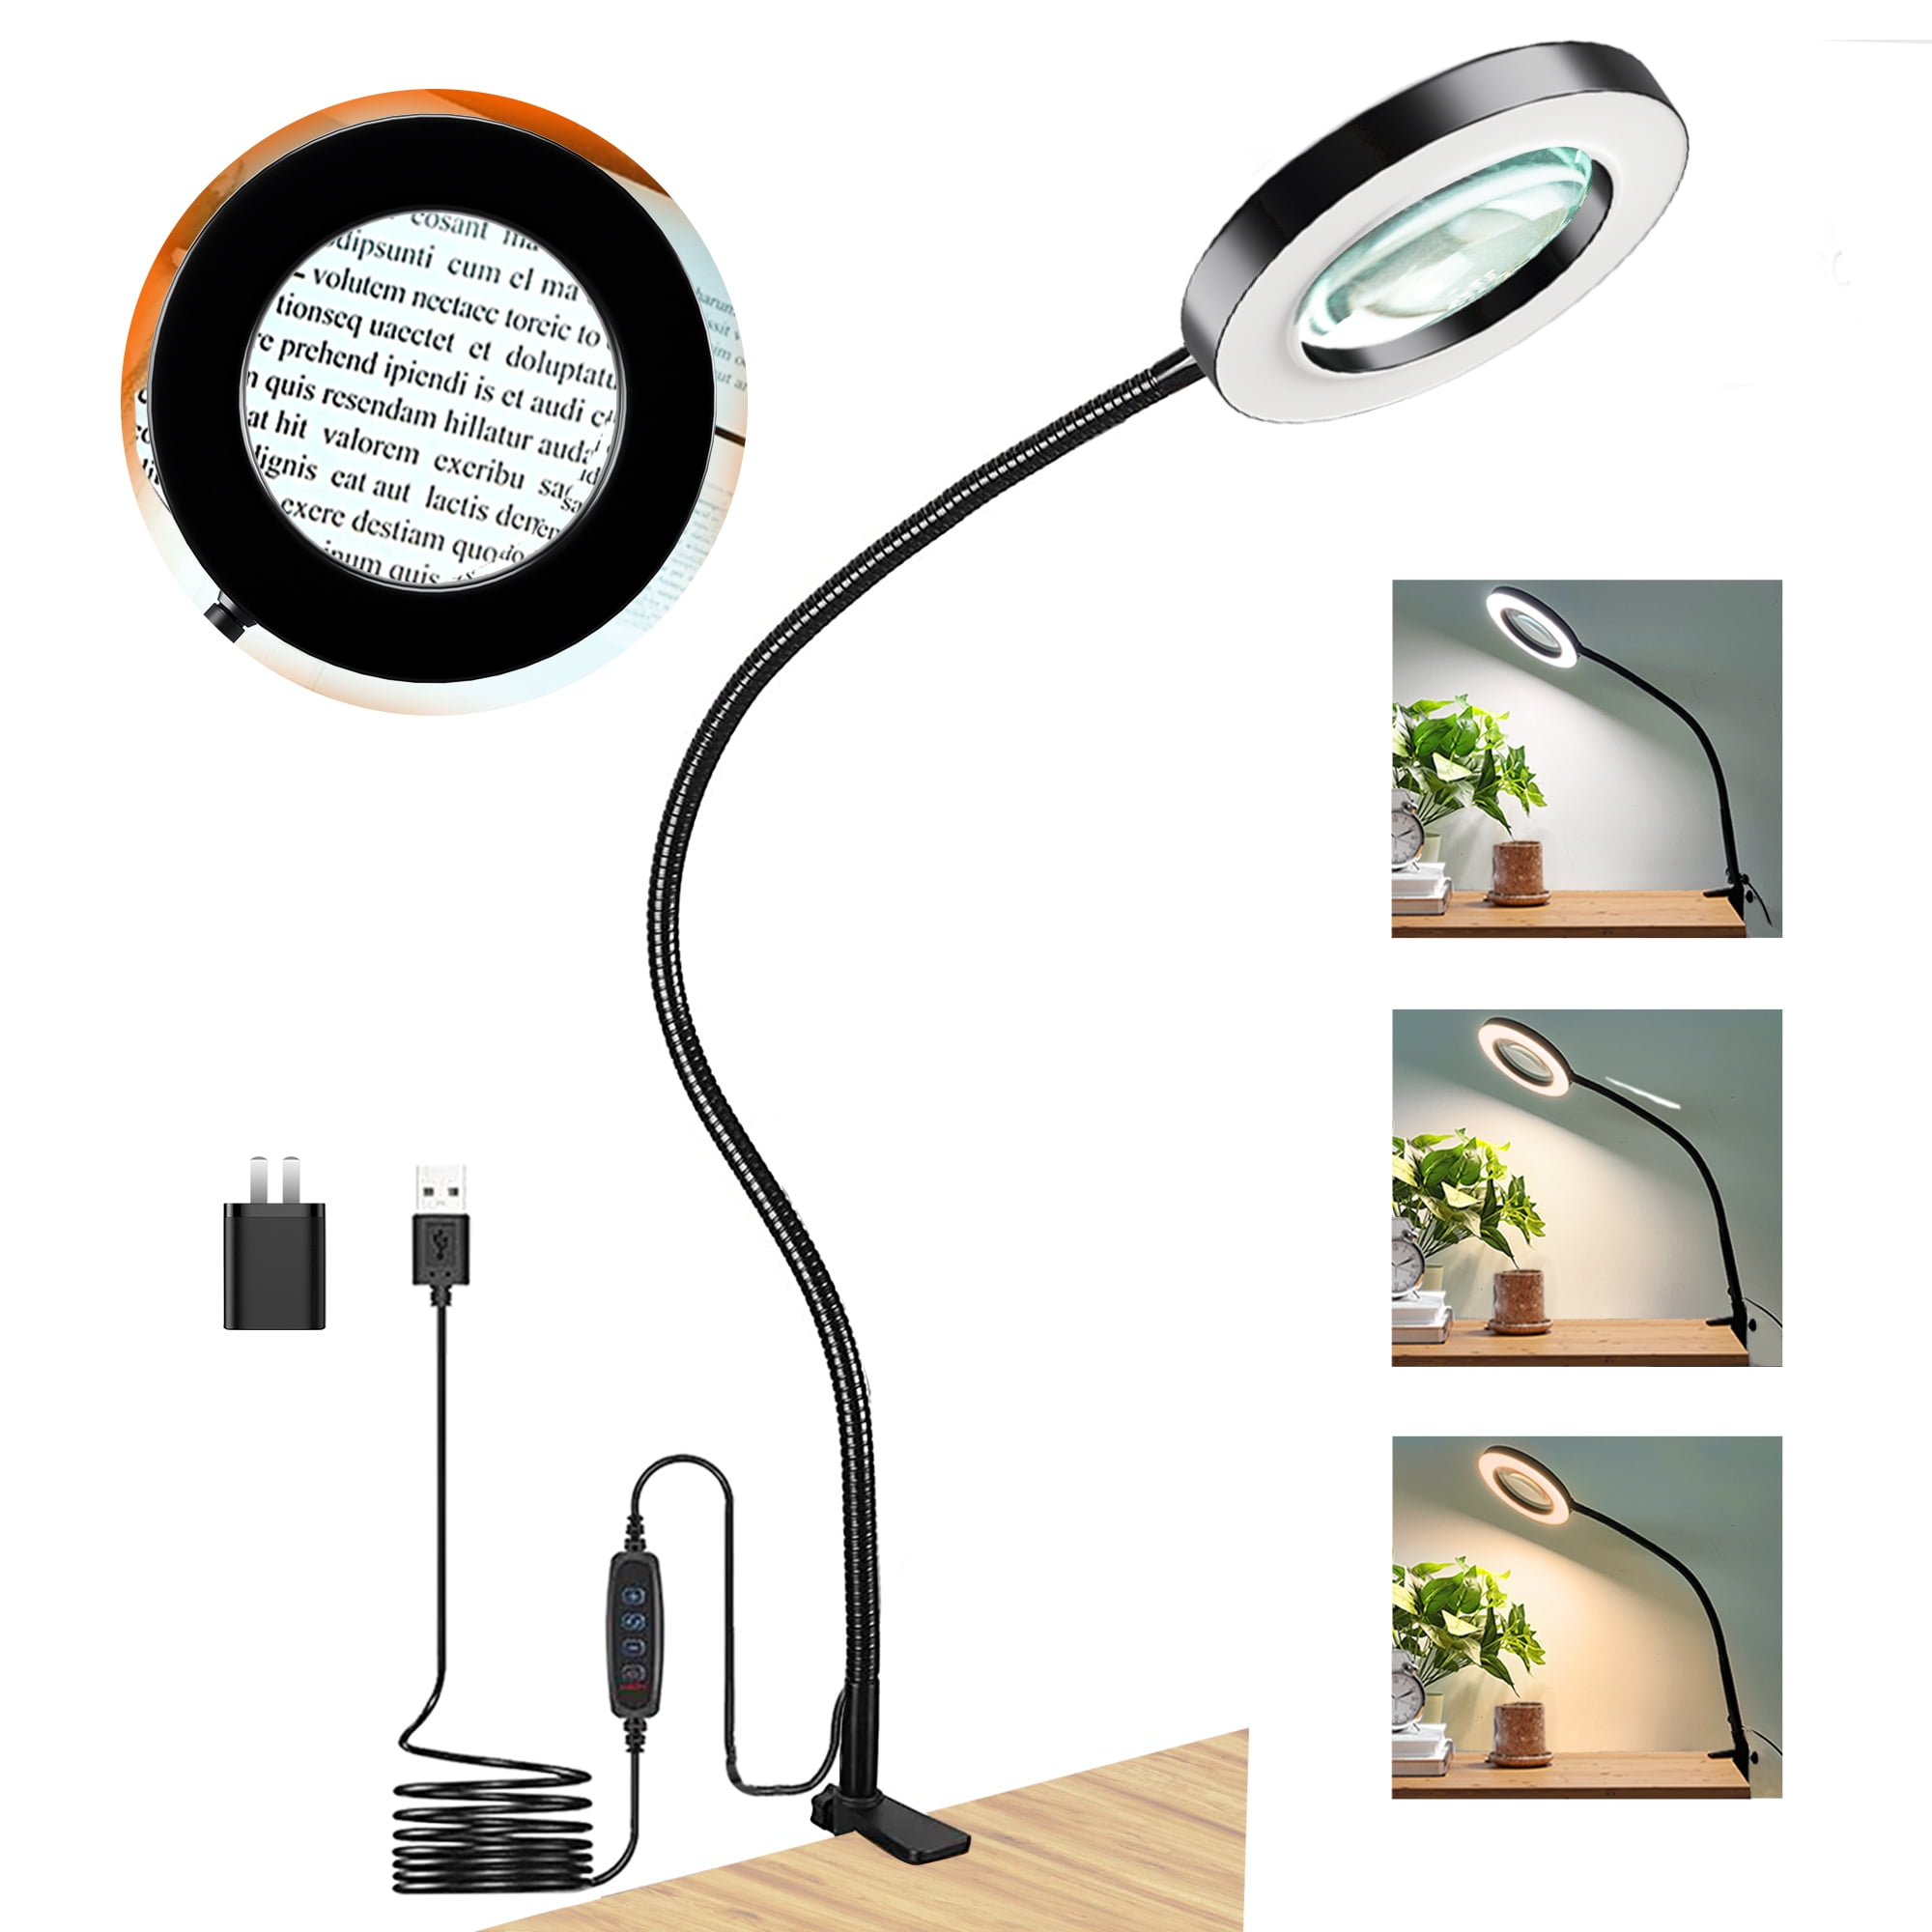 COSYWARM 5X Magnifying Lamp, Lighted Magnifying Glass with Light and Stand Hands  Free, Desk Magnifying Light, LED Magnifier Work Lamp for Reading, Crafts,  Sewing, Hobbies. 